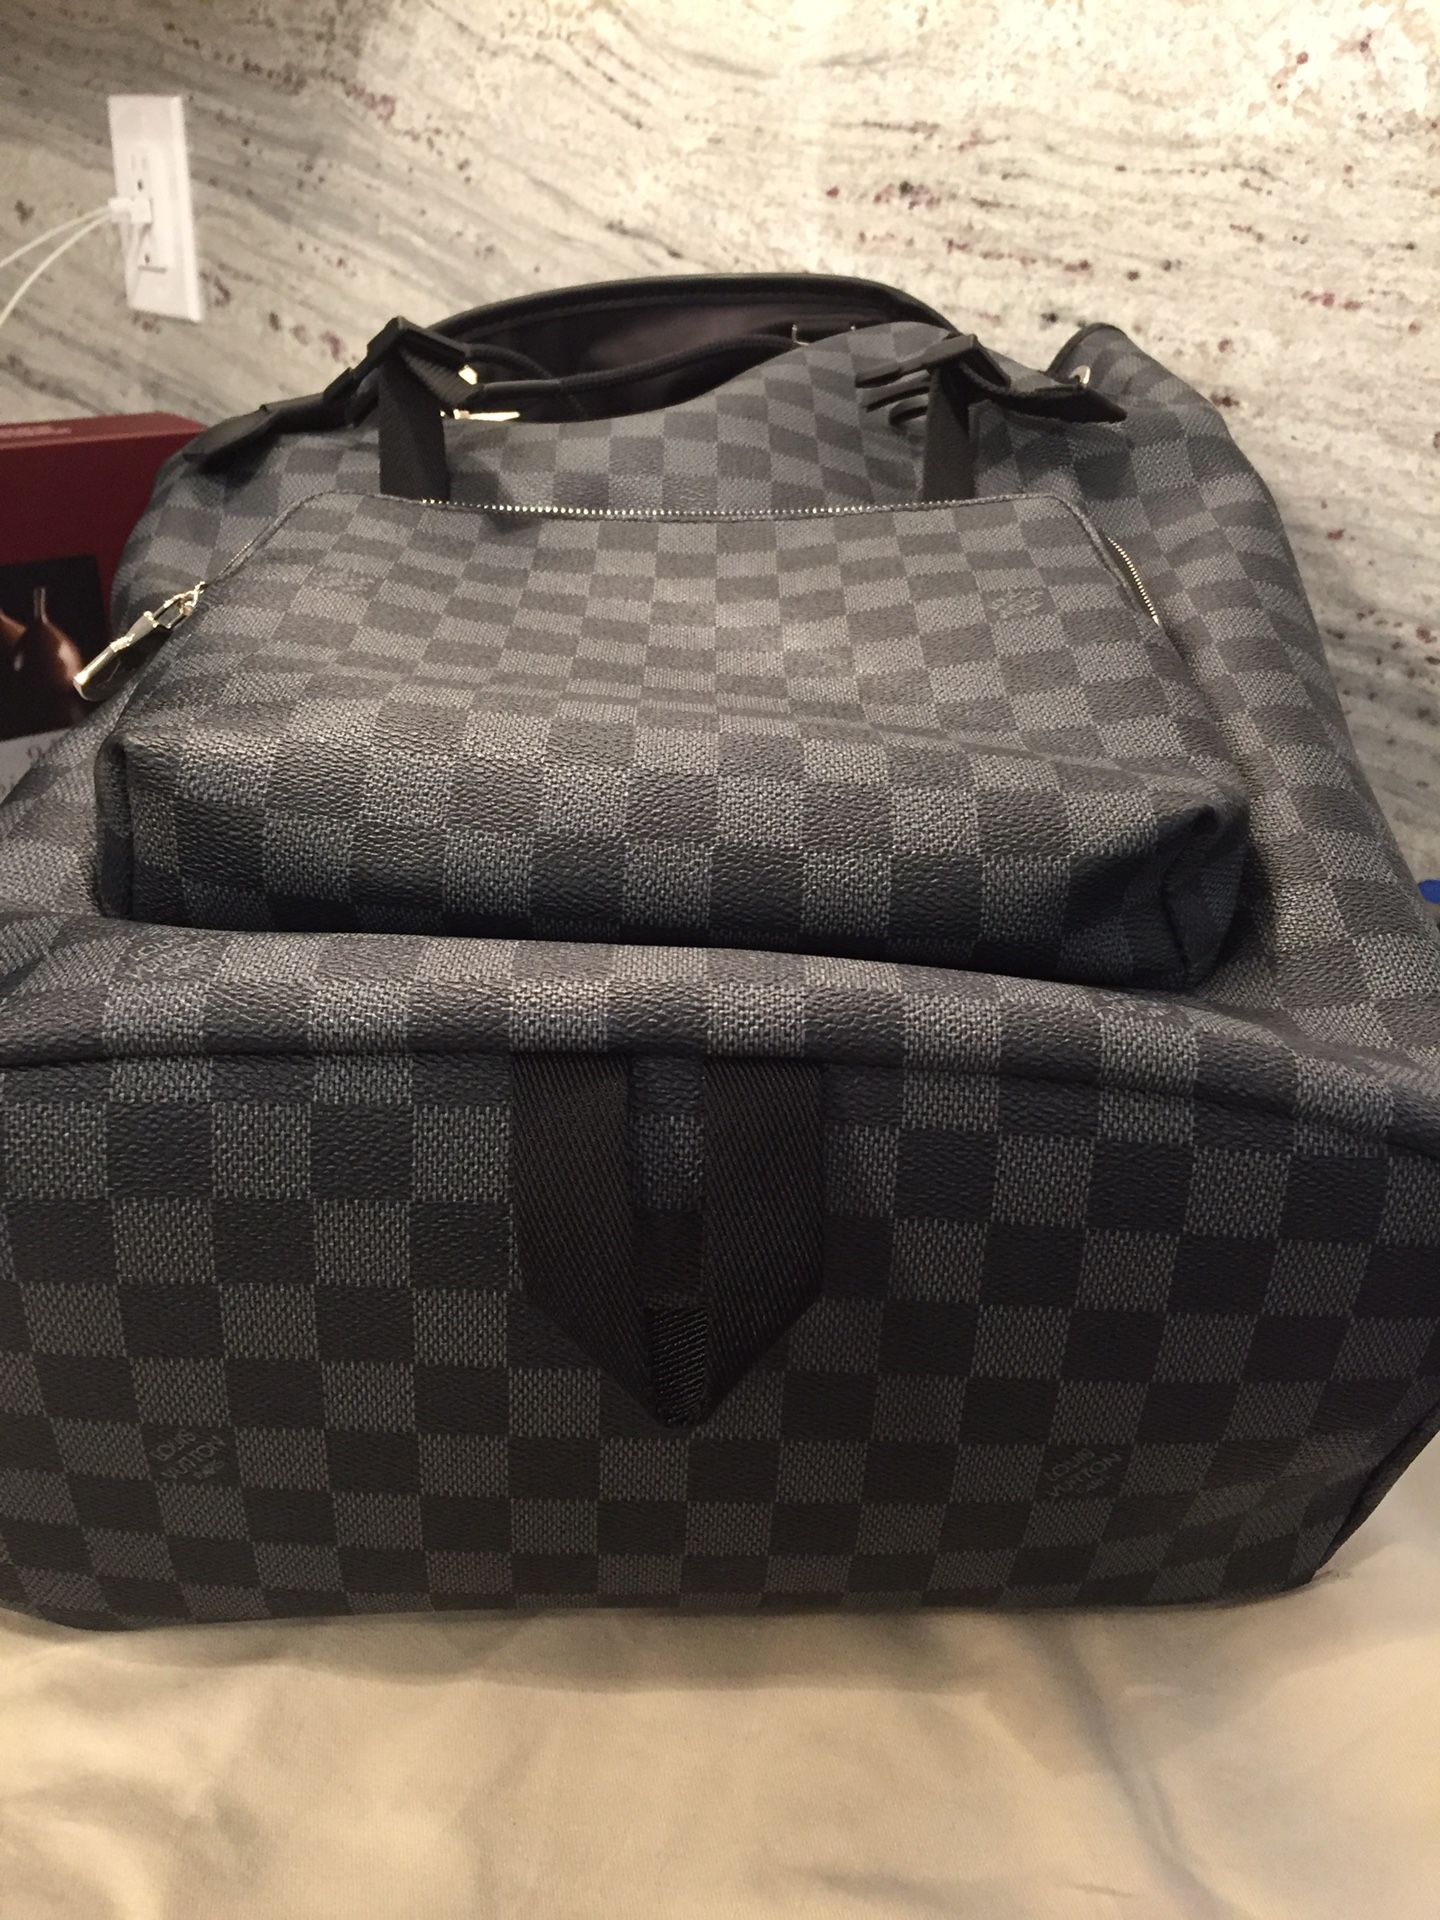 Louis vuitton x fragment Zack Backpack Used for Sale in Raleigh